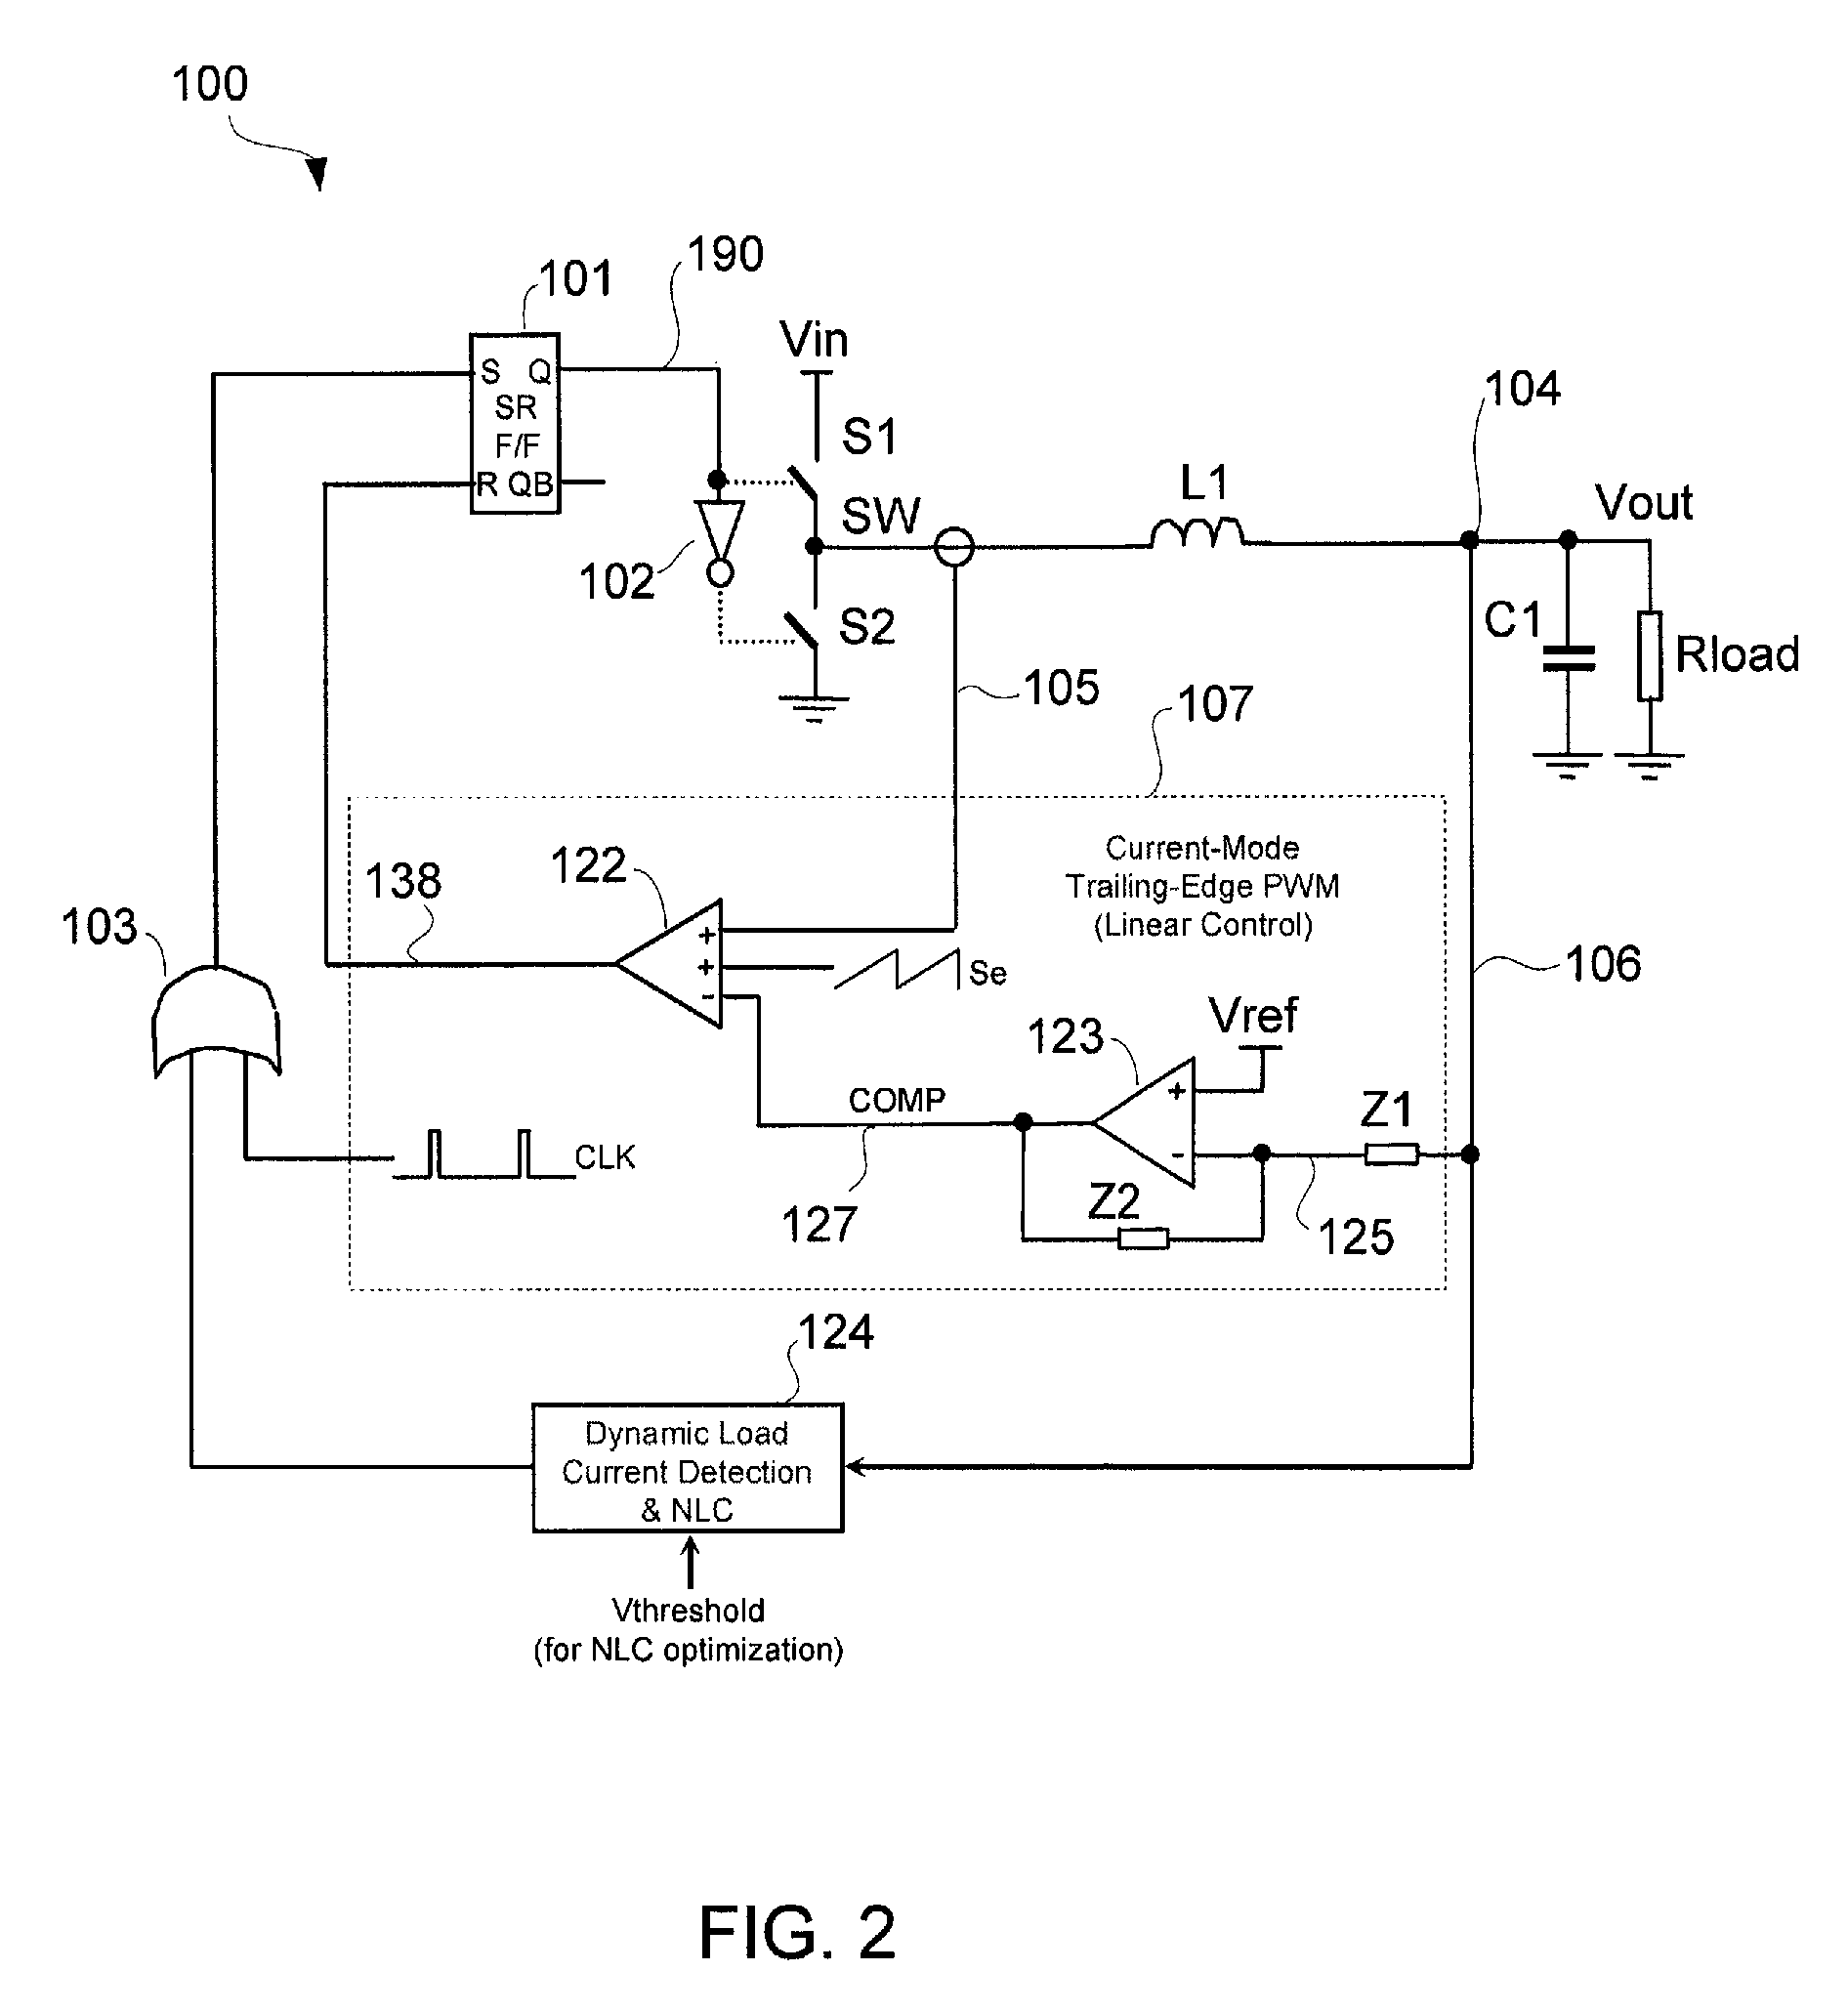 Non-linear control techniques for improving transient response to load current step change